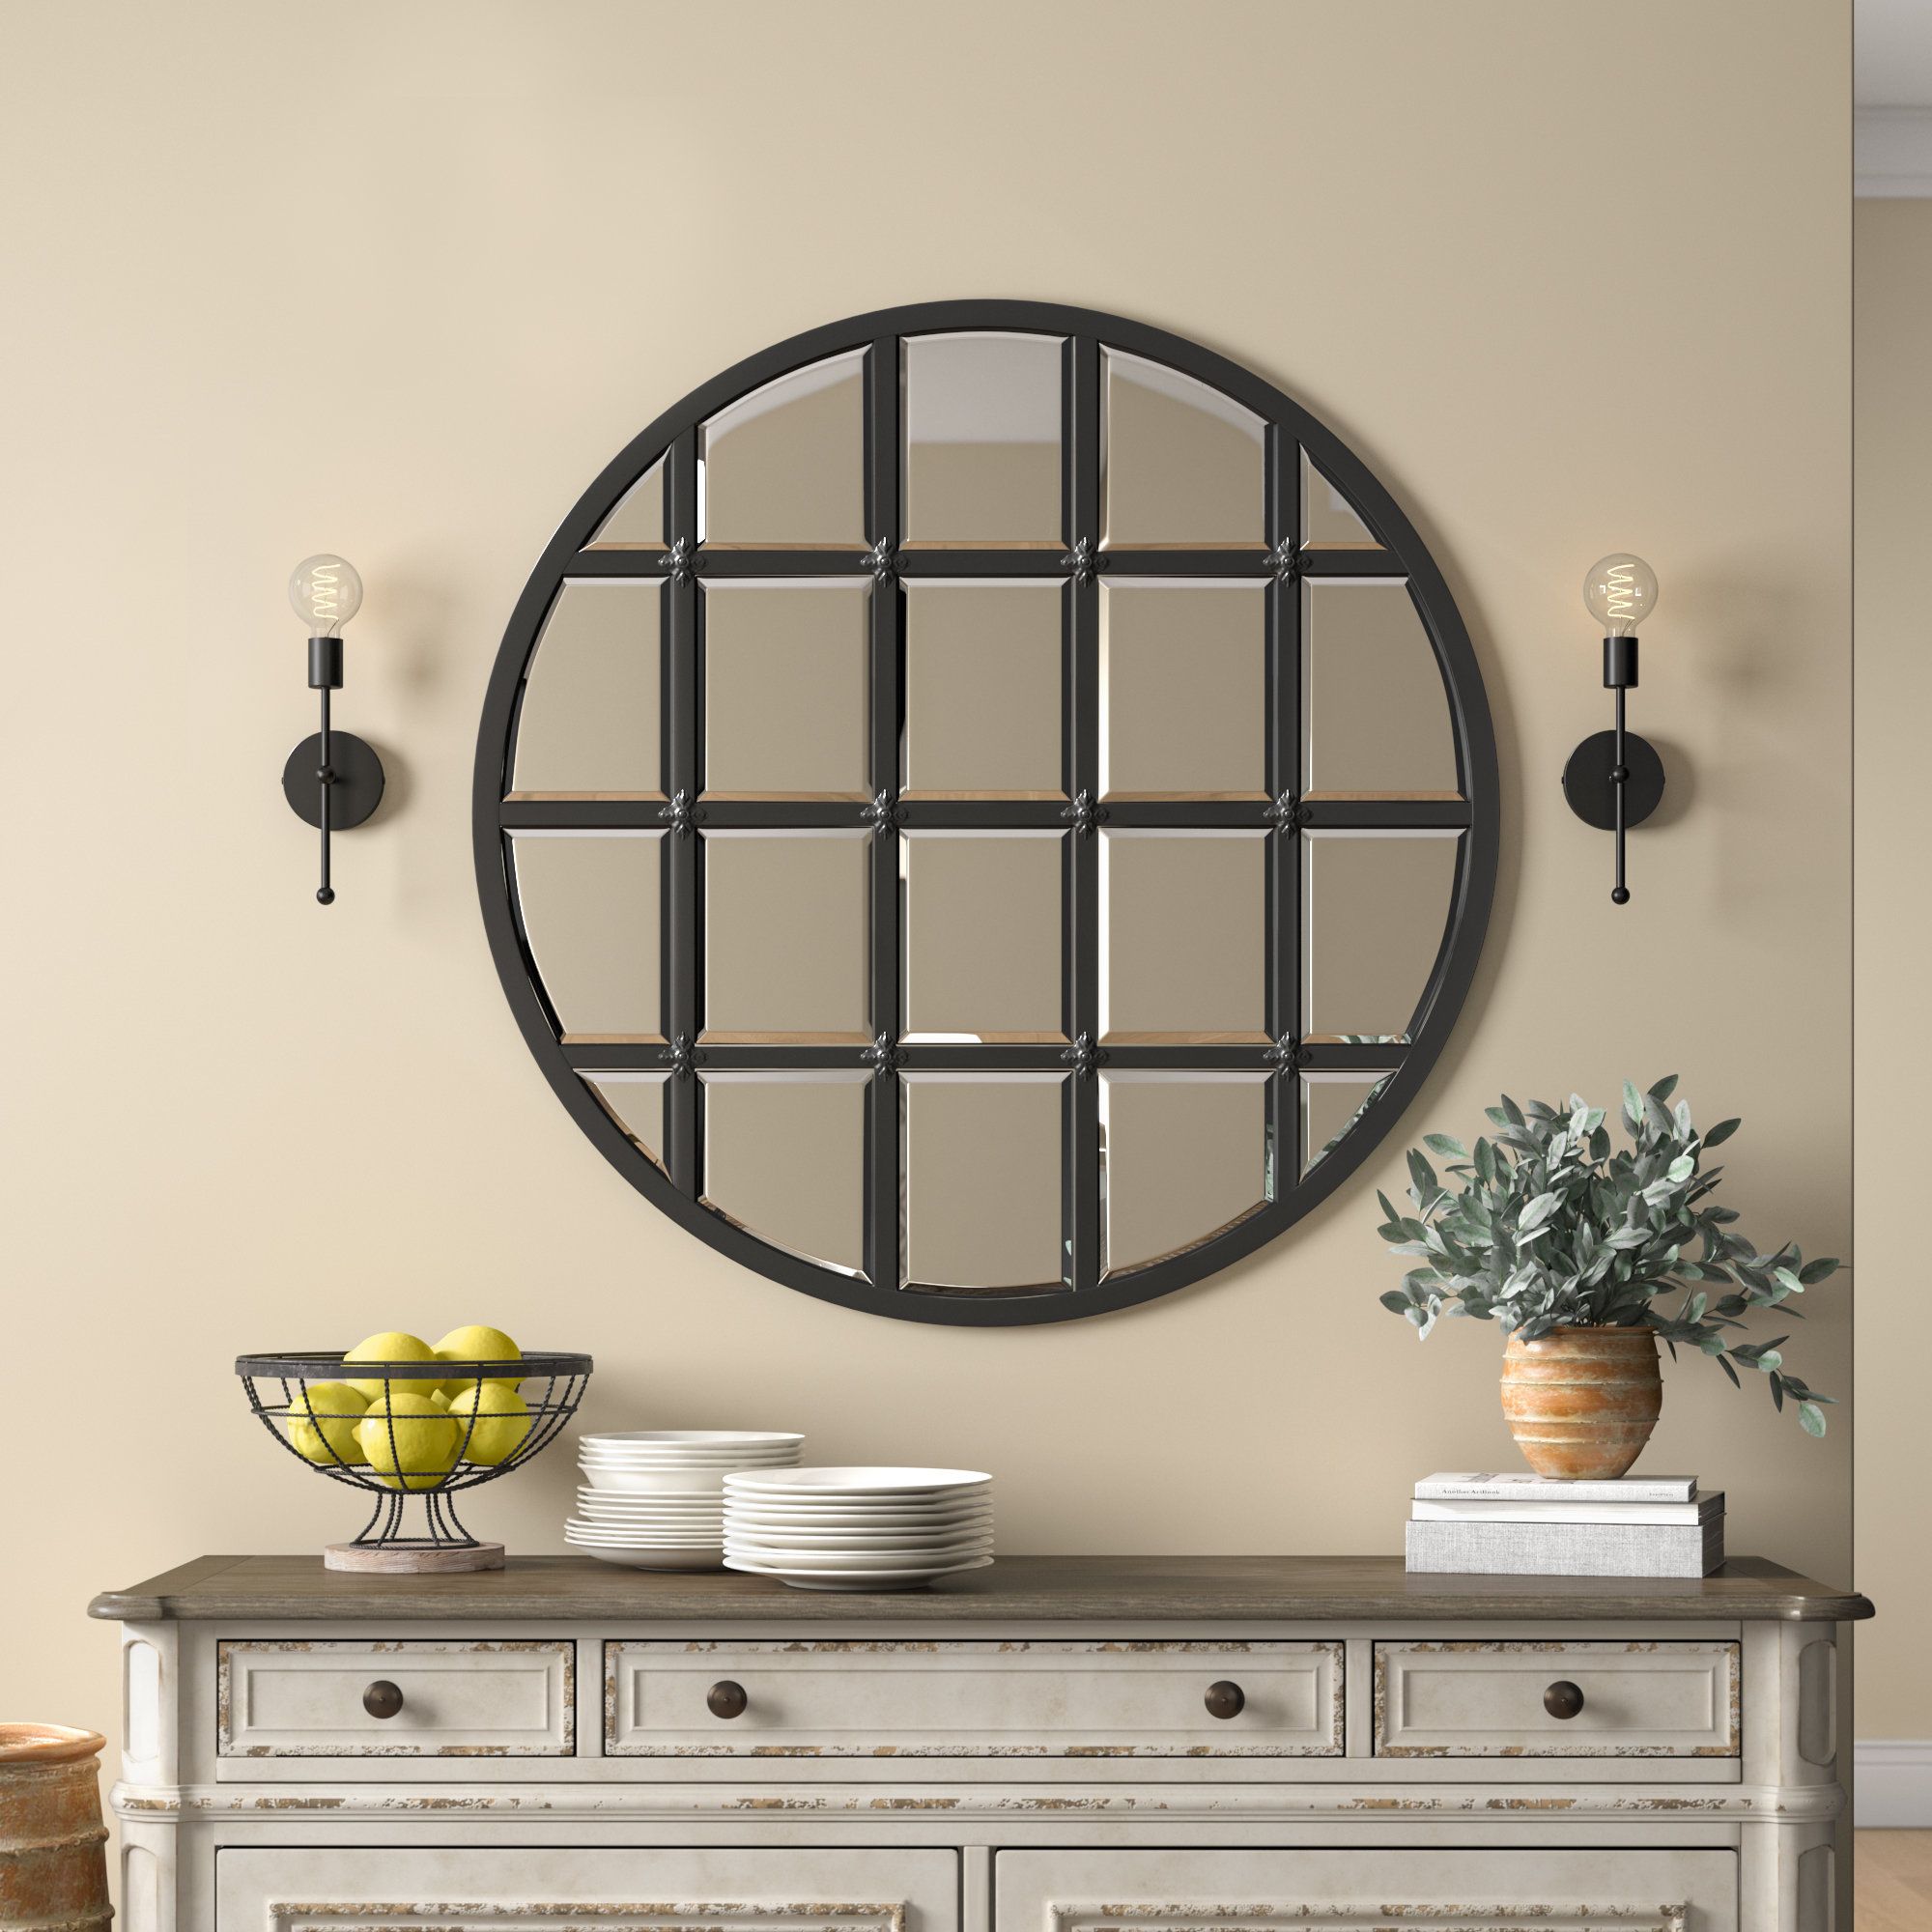 Black Industrial Wall Mirrors You'll Love In 2019 | Wayfair In Austin Industrial Accent Mirrors (View 11 of 20)